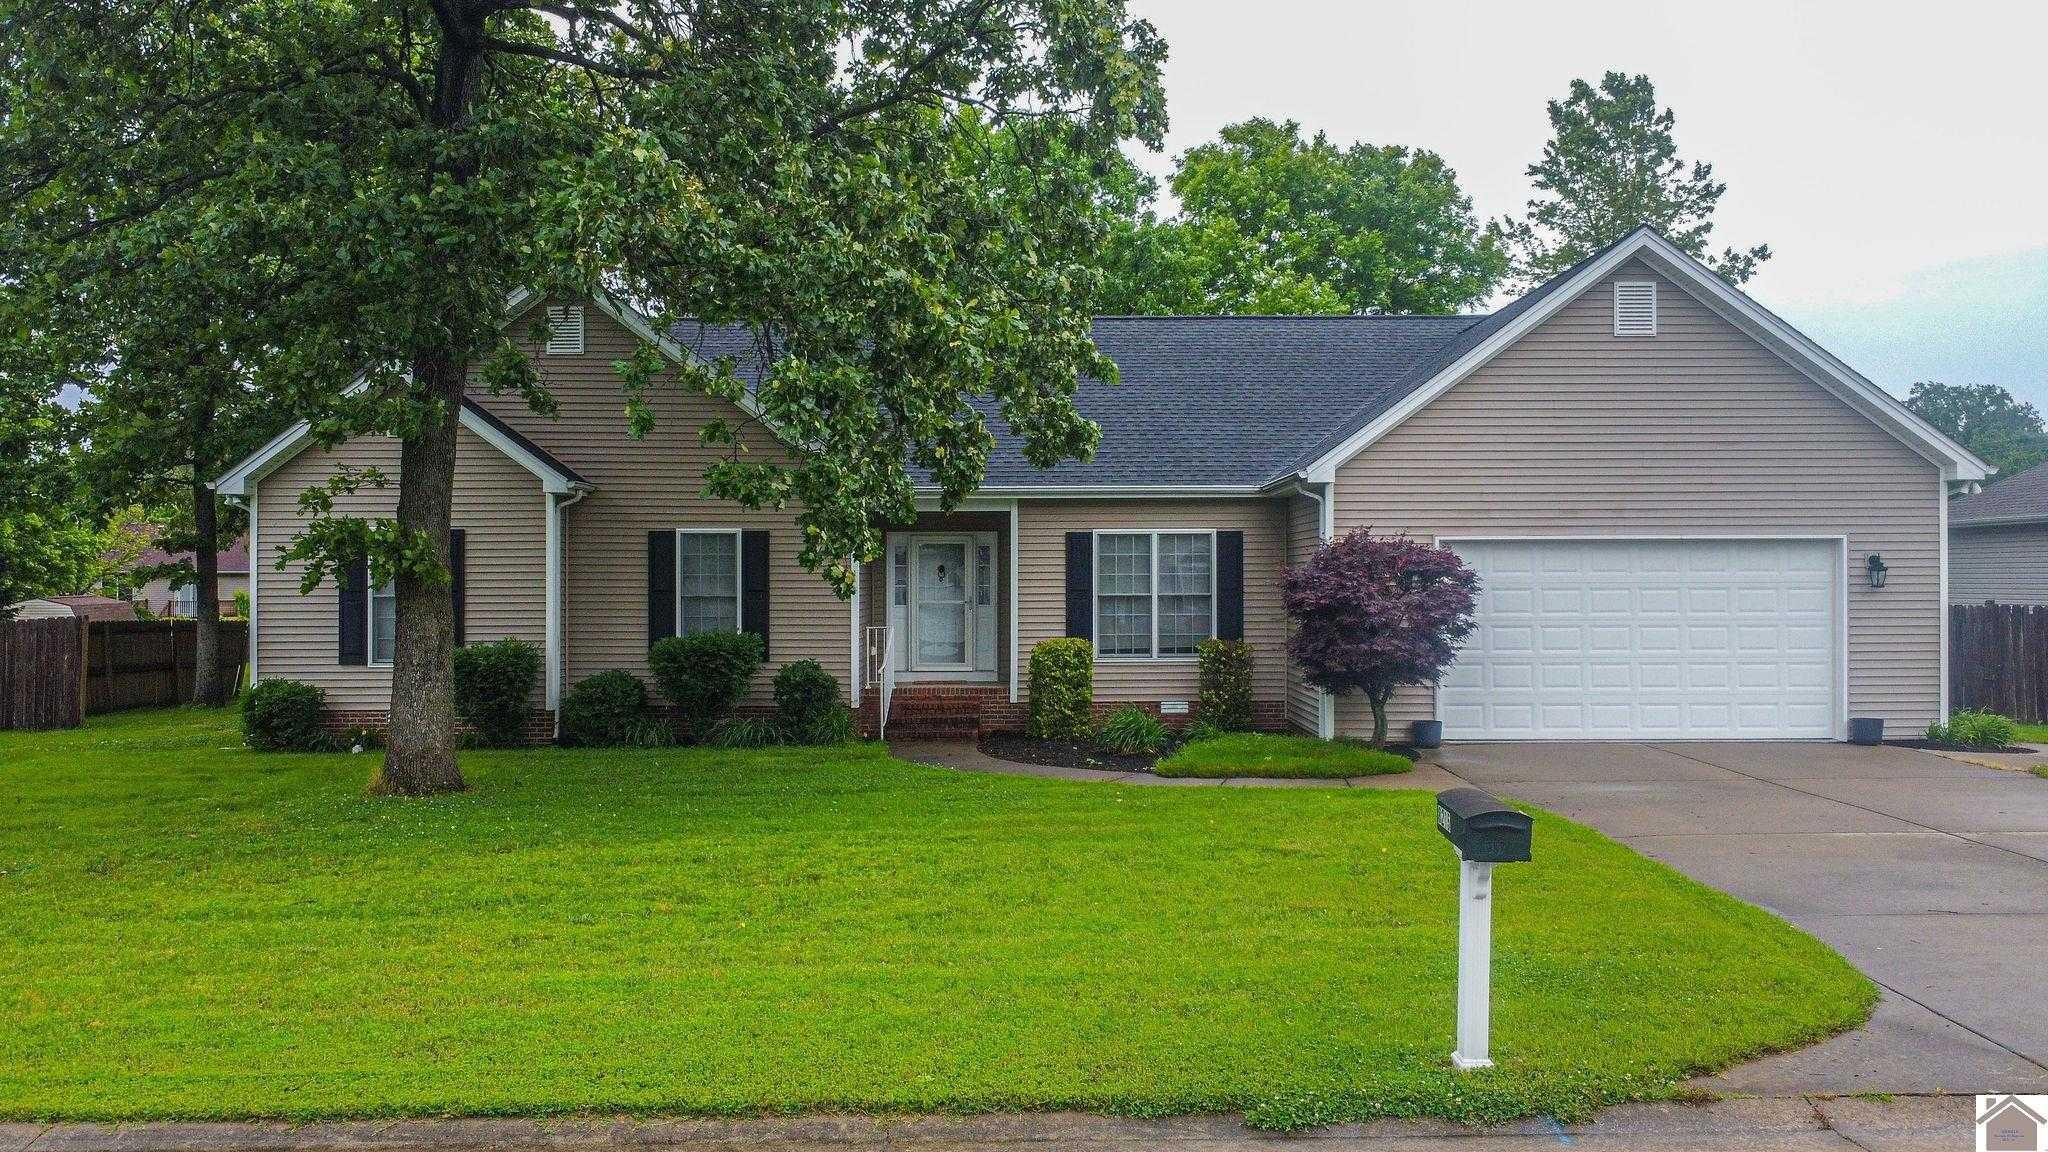 8215 Danube Dr., 126788, West Paducah, Single Family,  for sale, The Vince Carter Team at Carter Realty Group, LLC